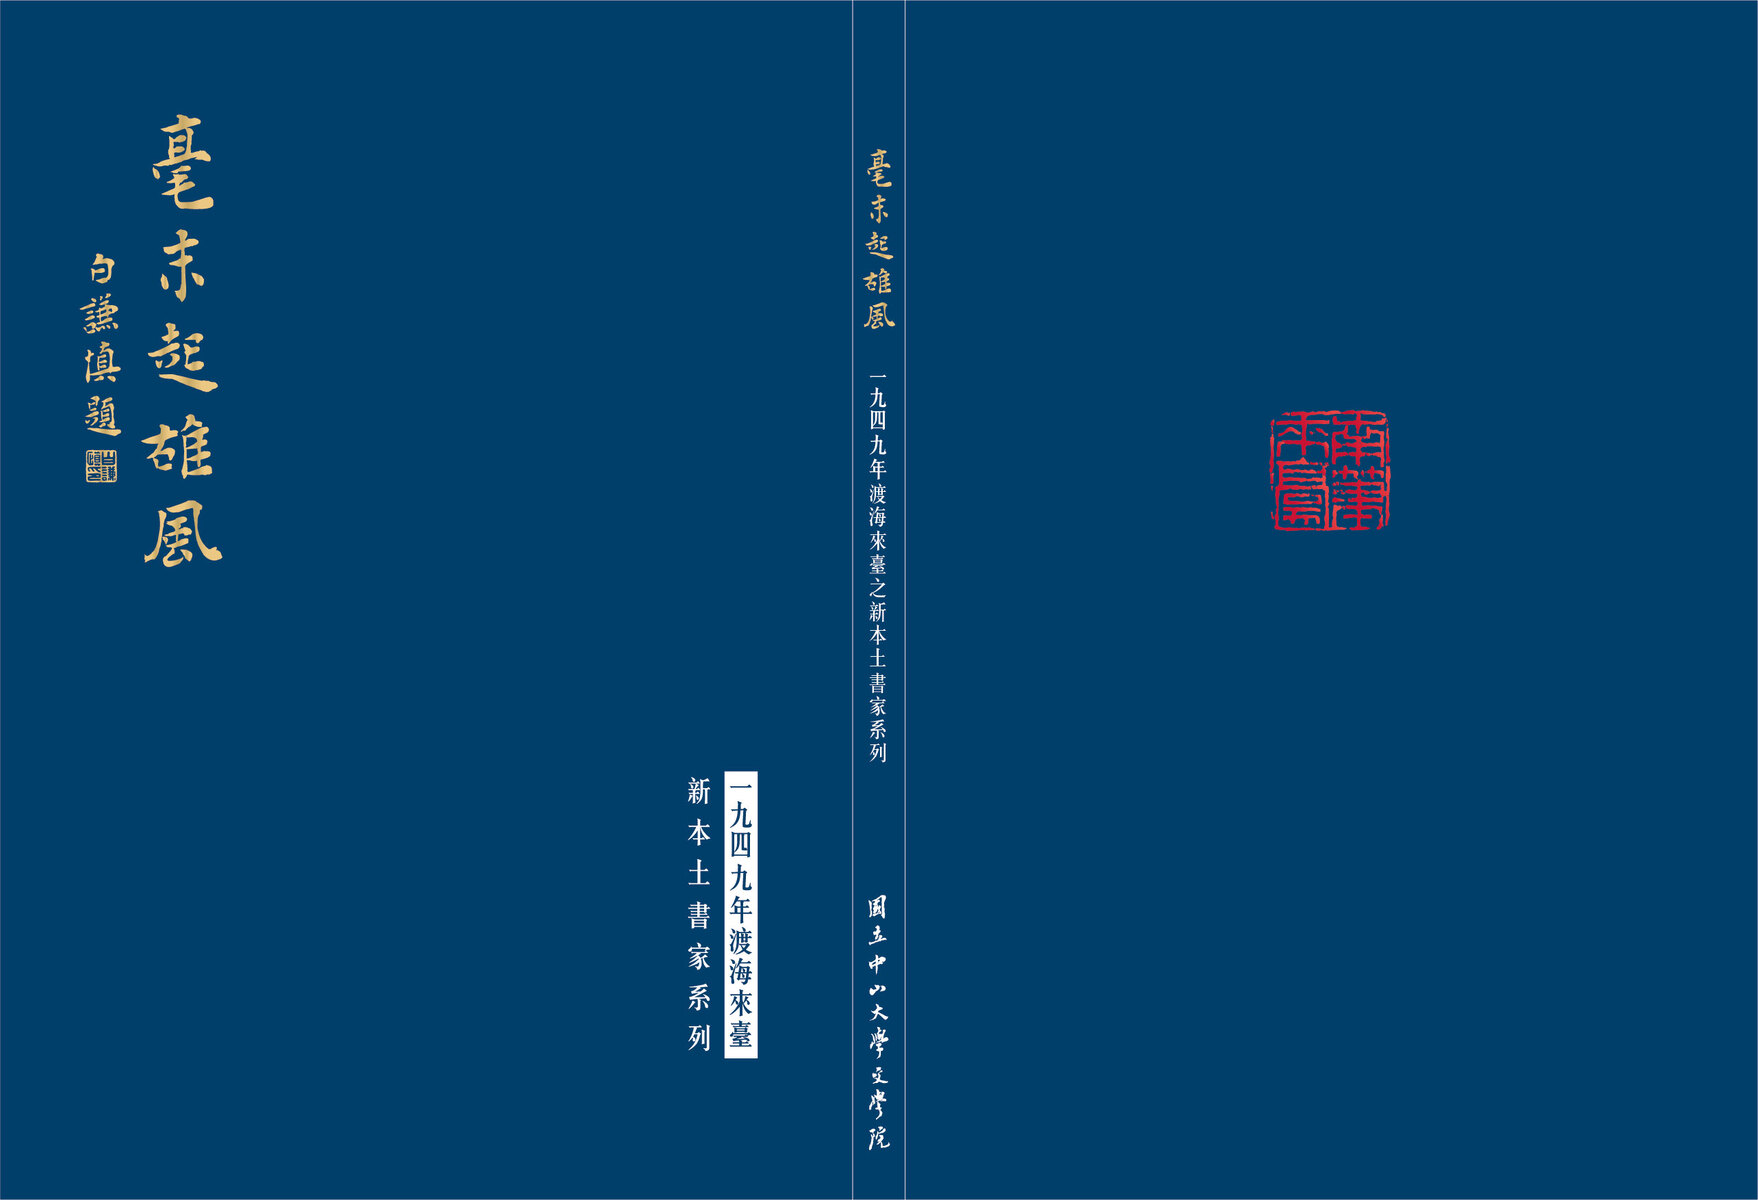 The cover of the album introducing artworks by calligraphers who moved to Taiwan after 1949.